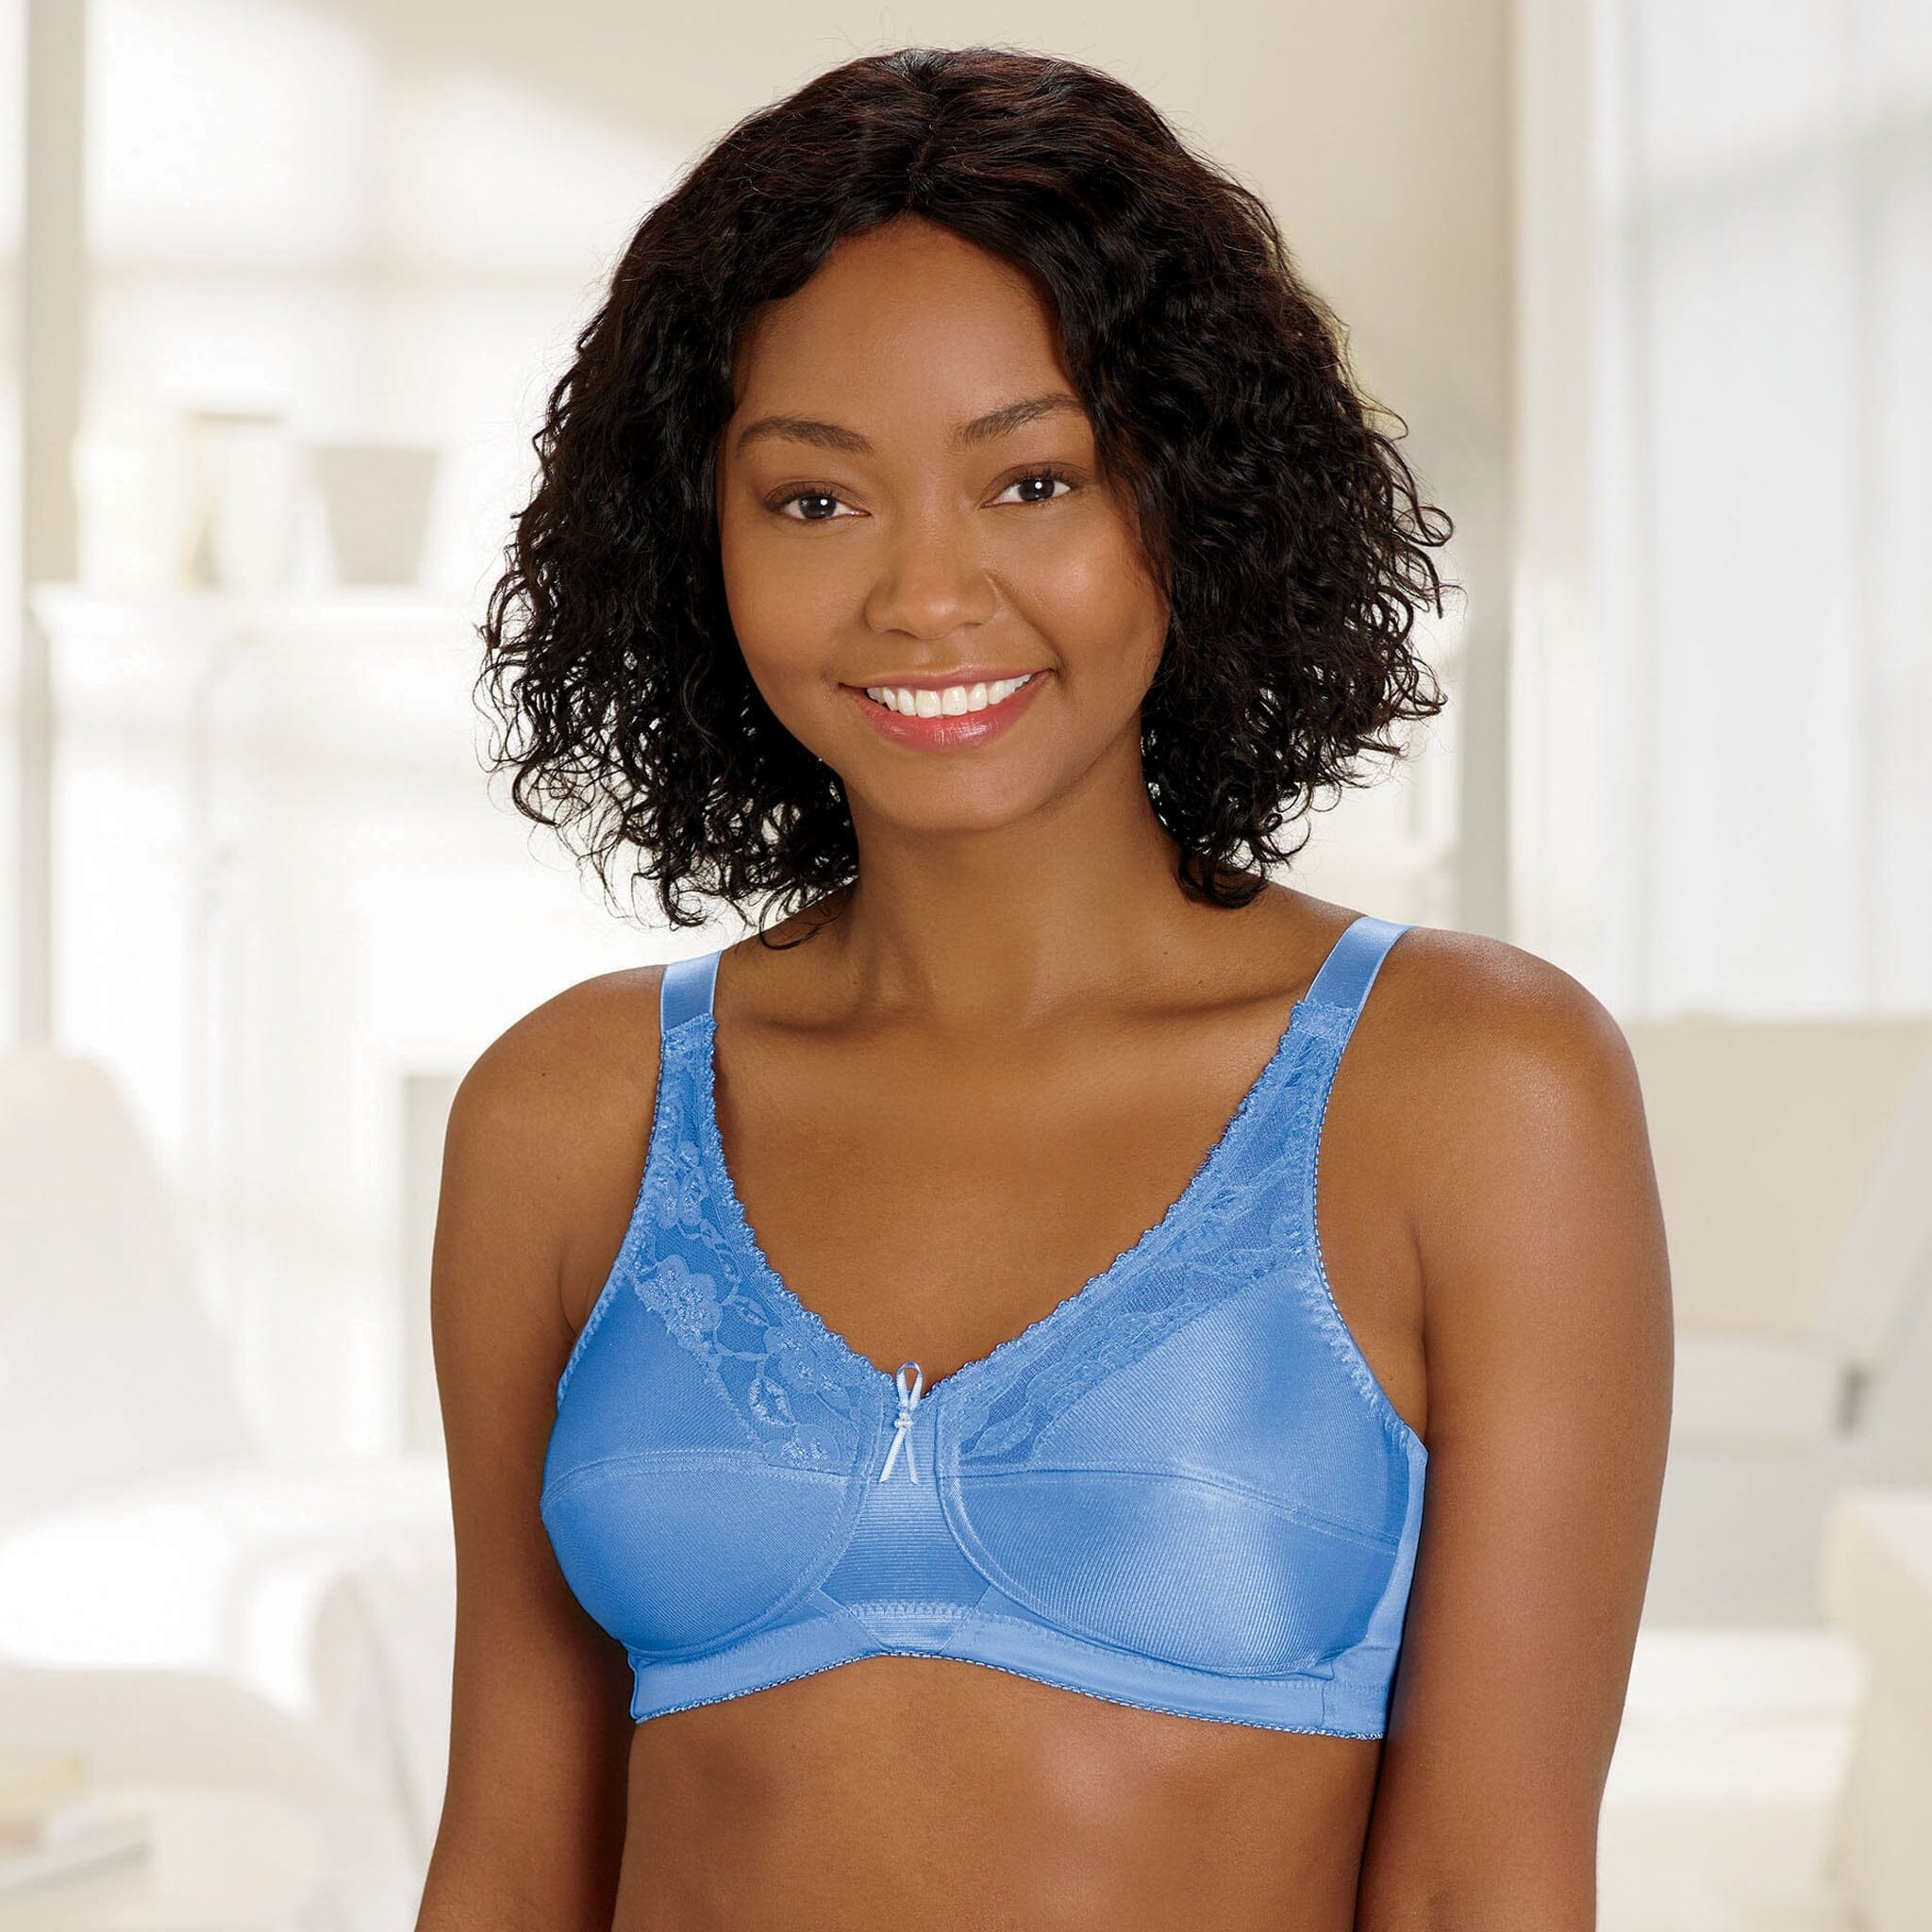 Why Wear a Bra at All? - Bras for Breast Cancer Survivors